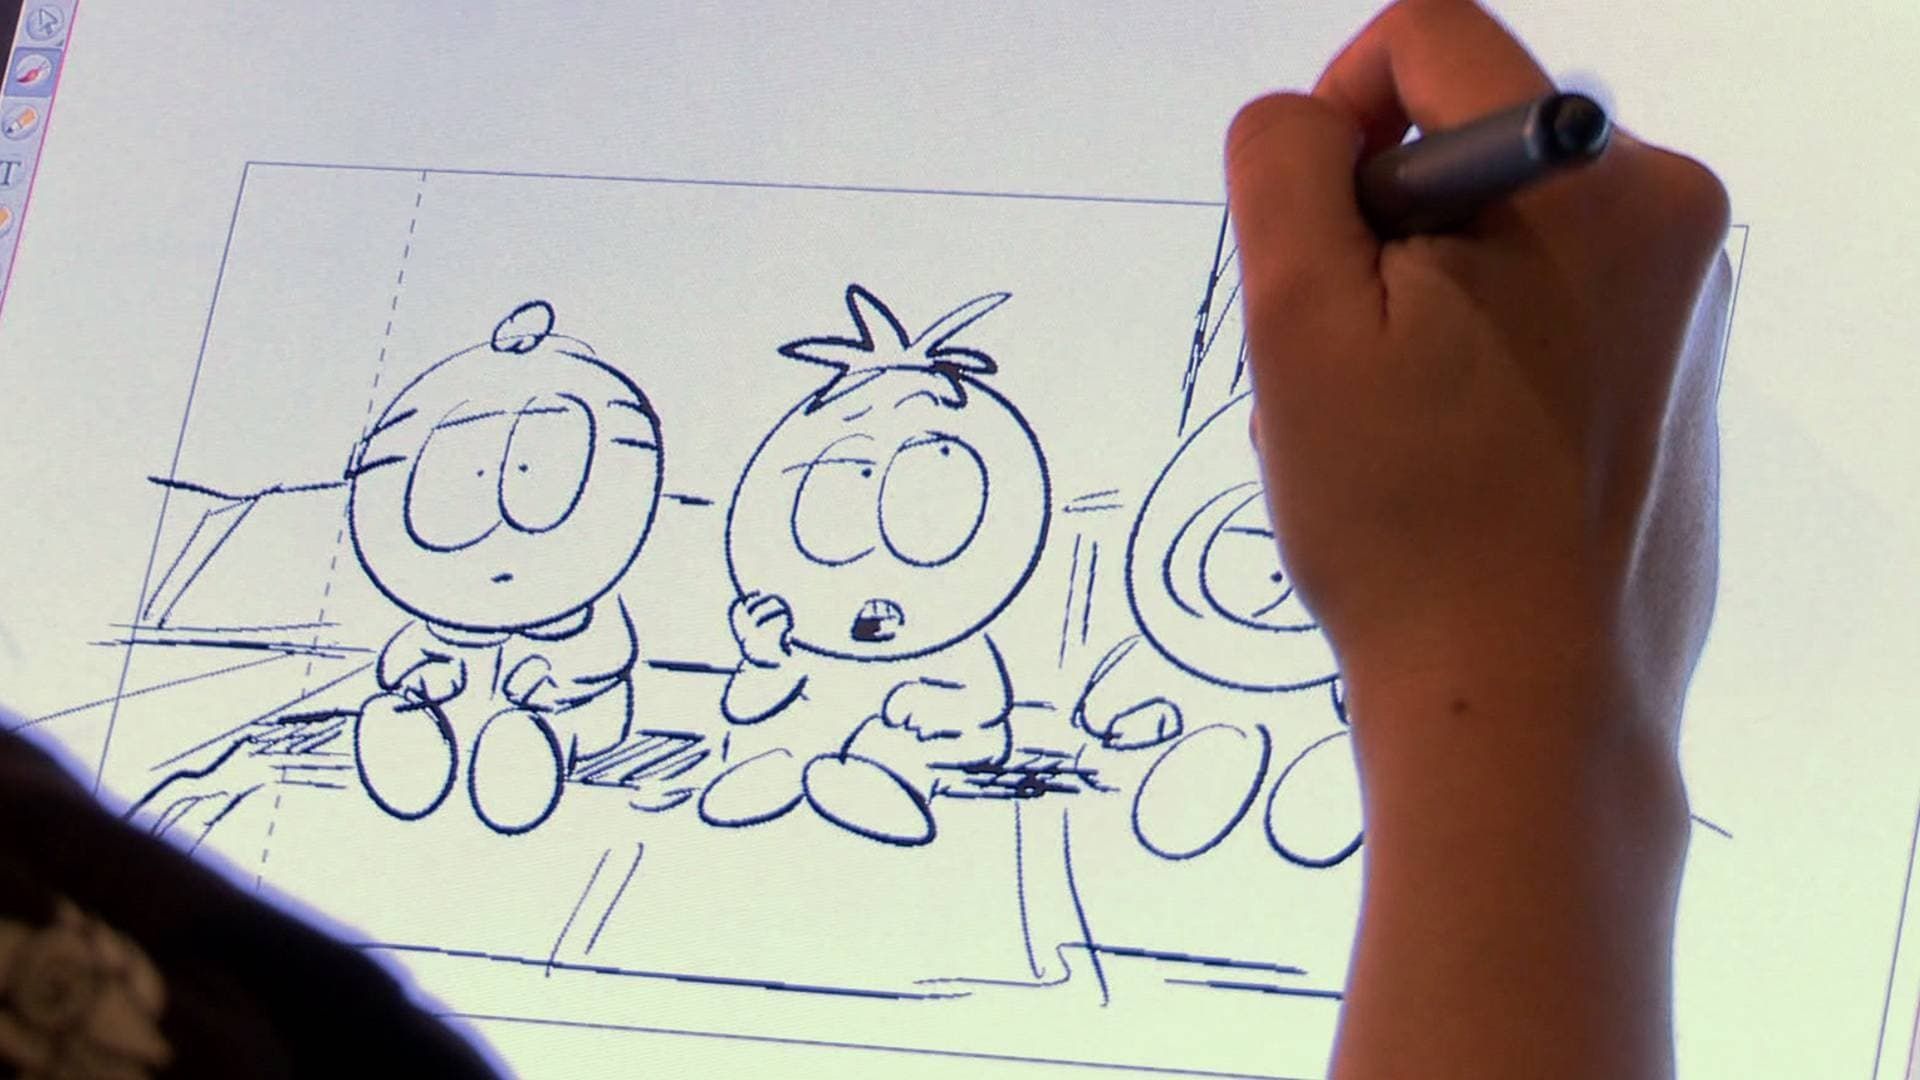 6 Days to Air: The Making of South Park background